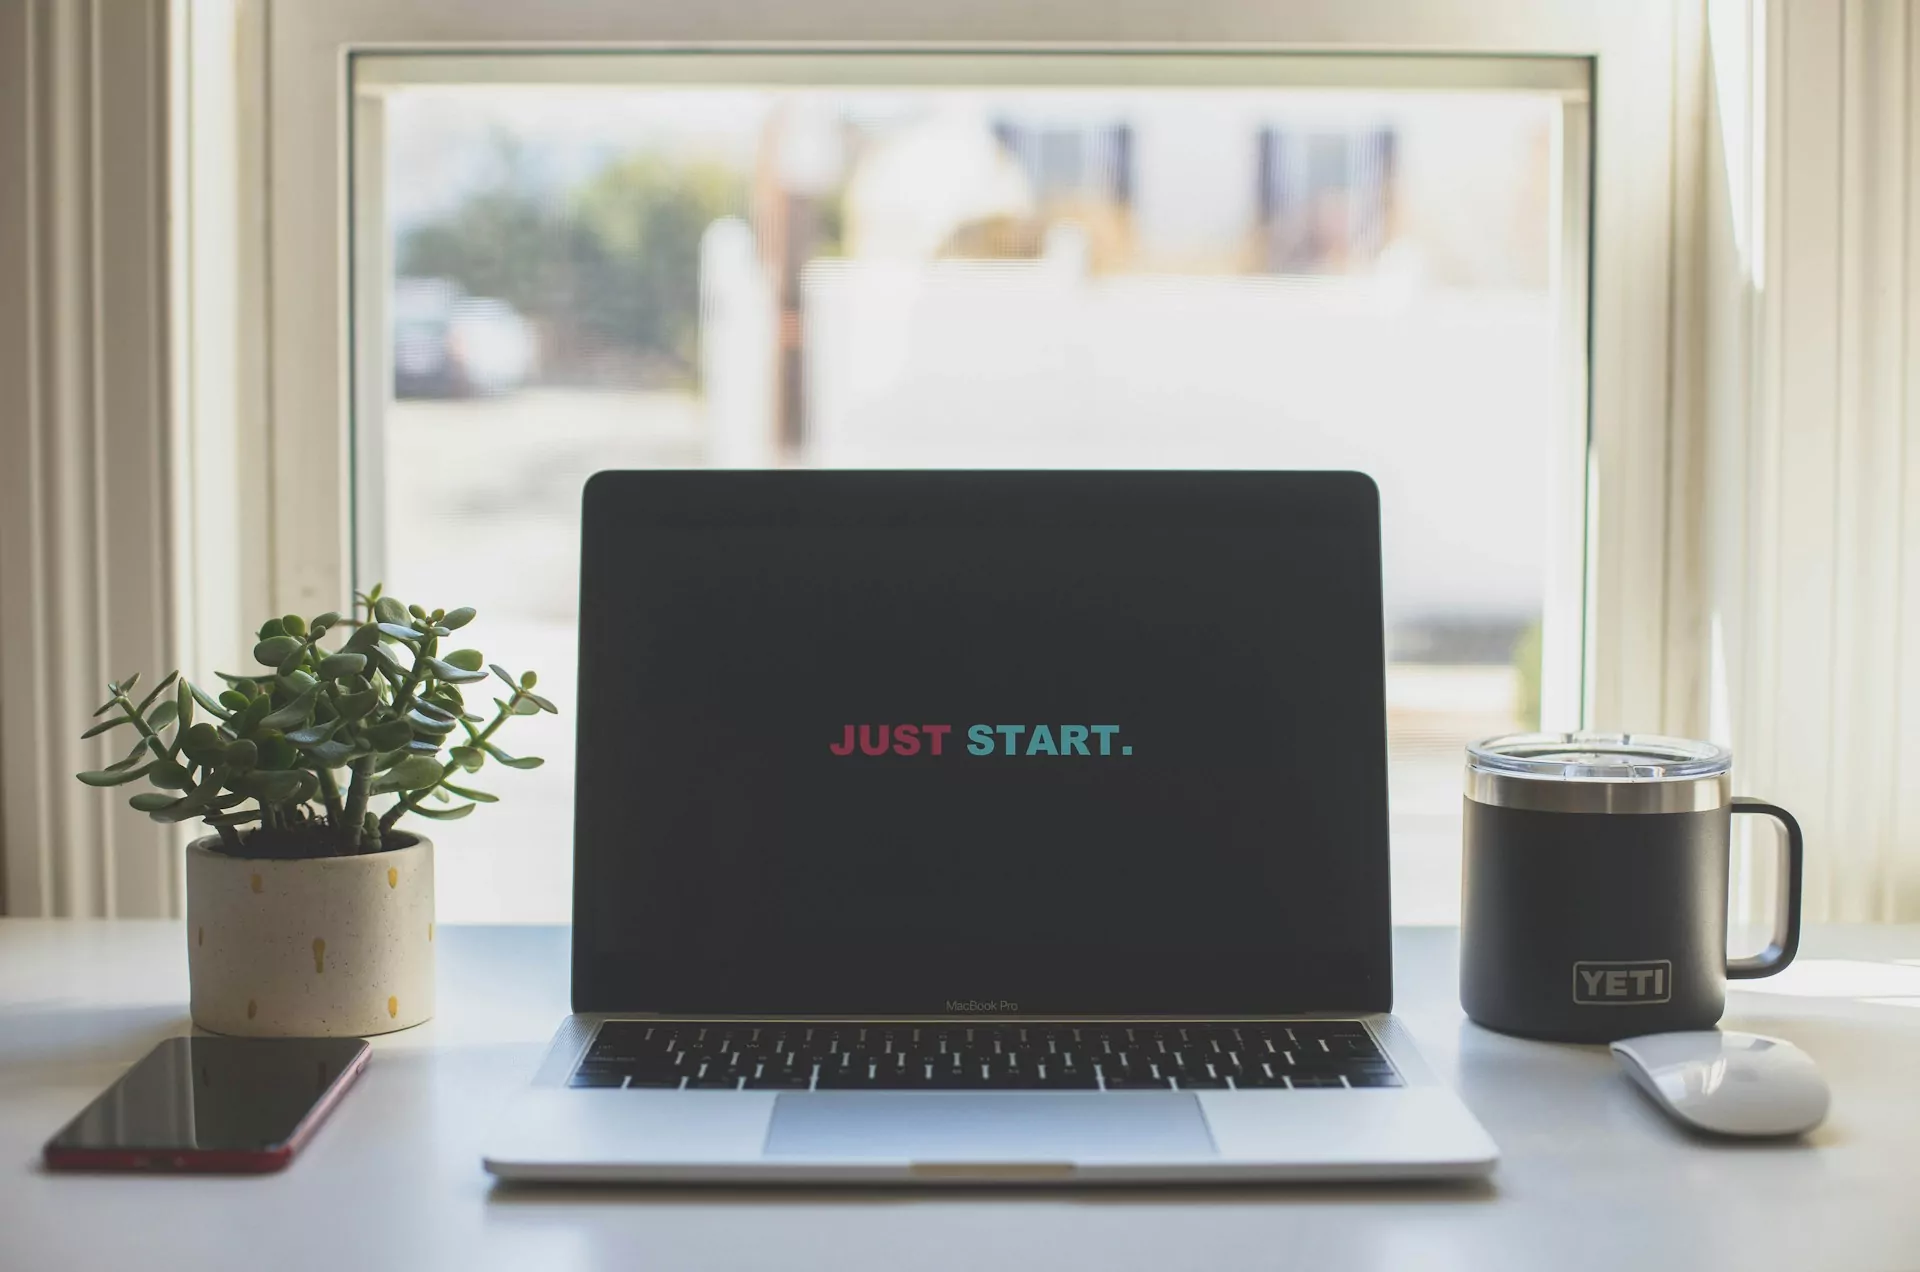 A laptop displaying the words "Just Start" on the screen.